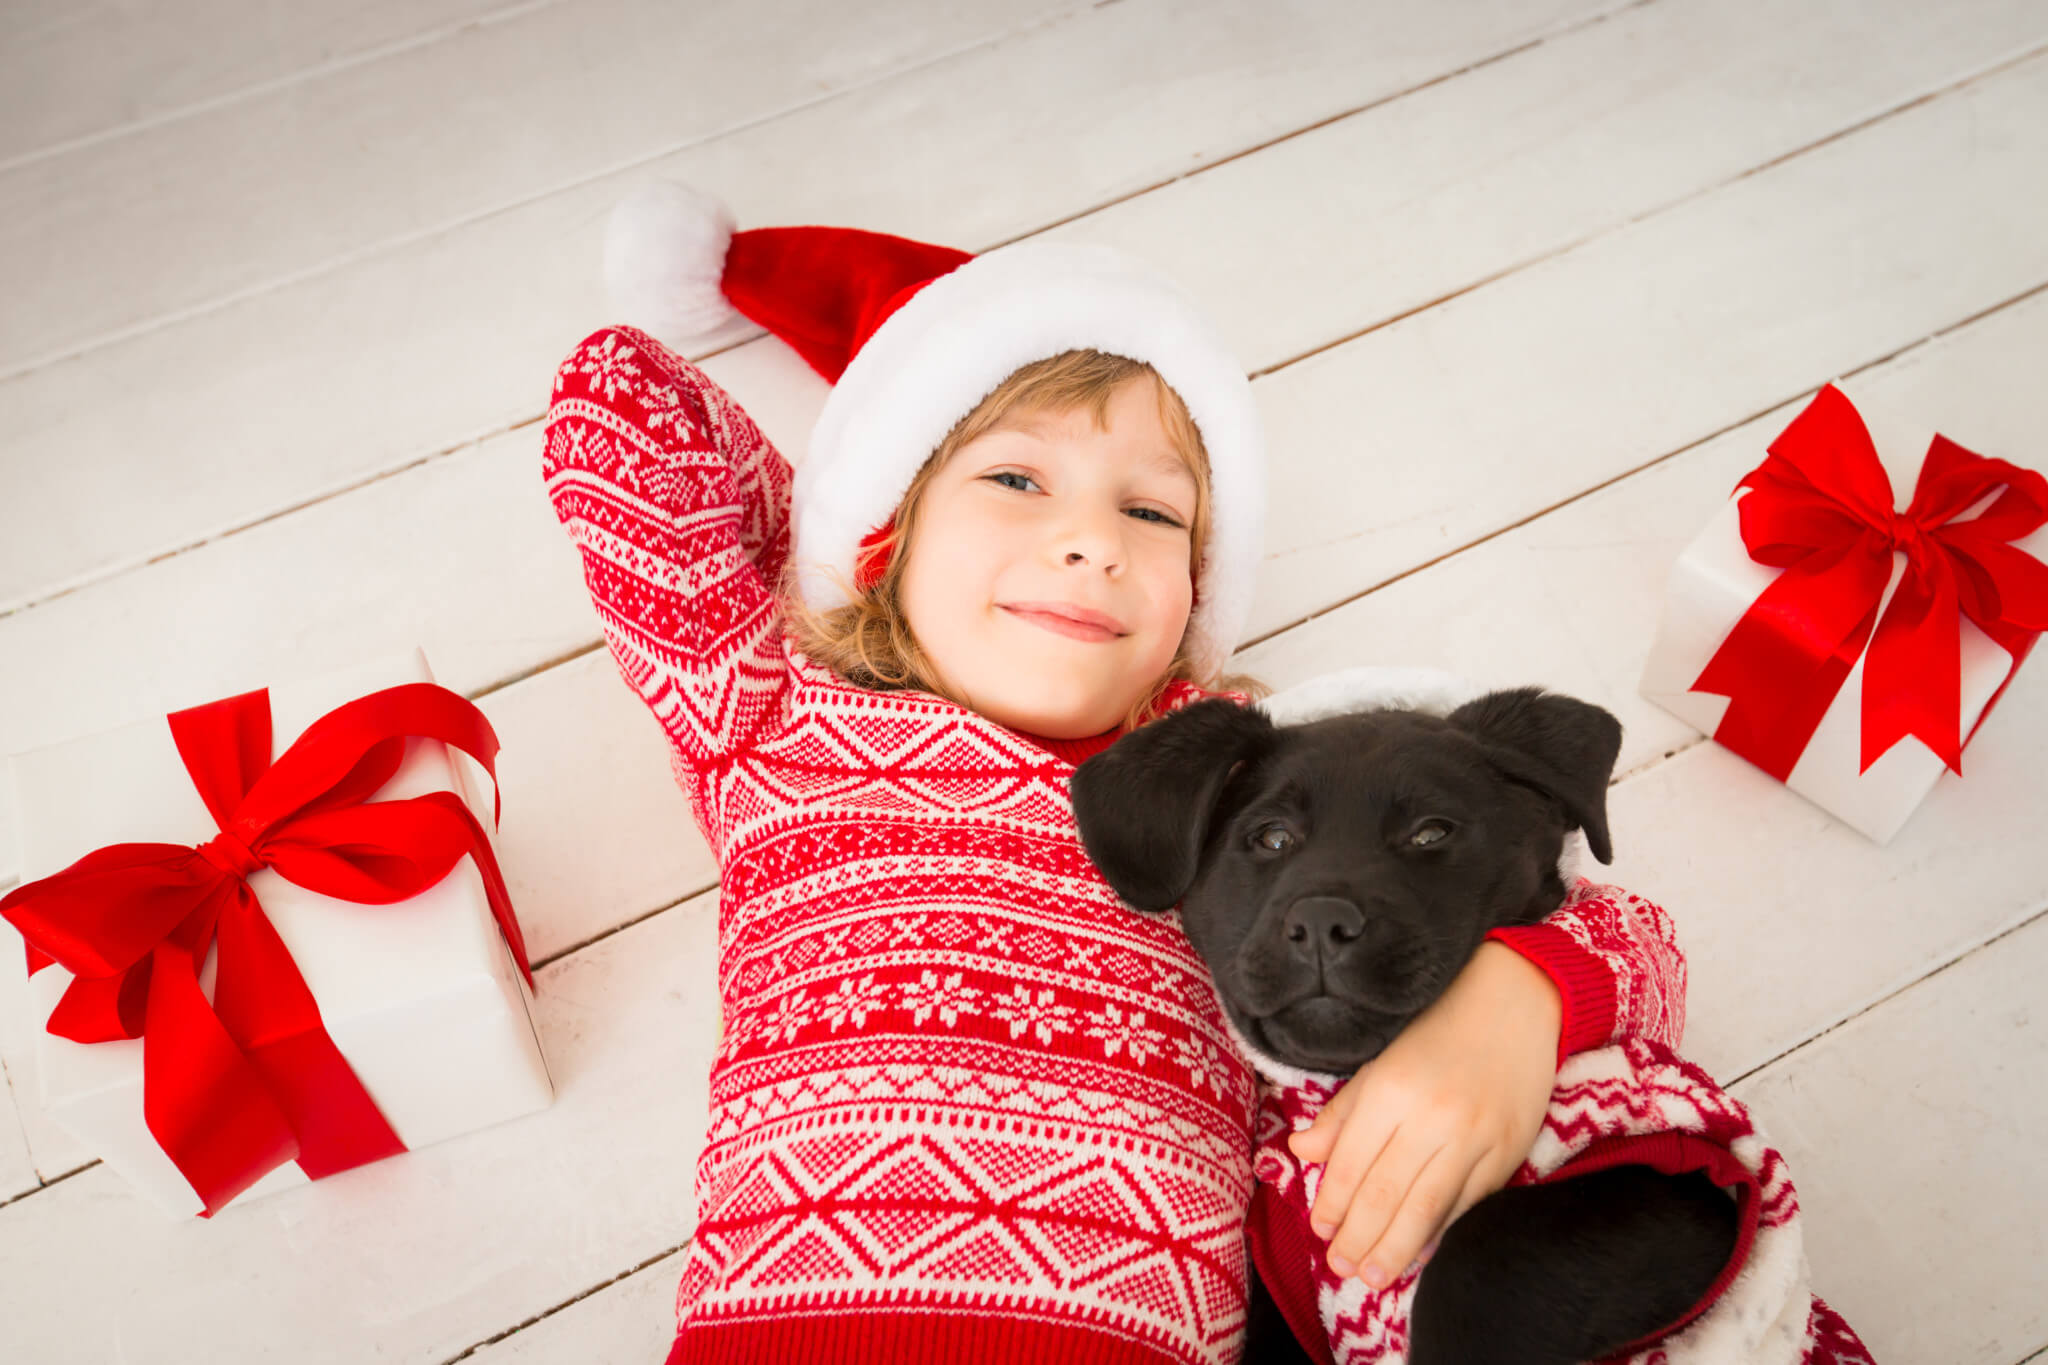 Child and dog in Christmas